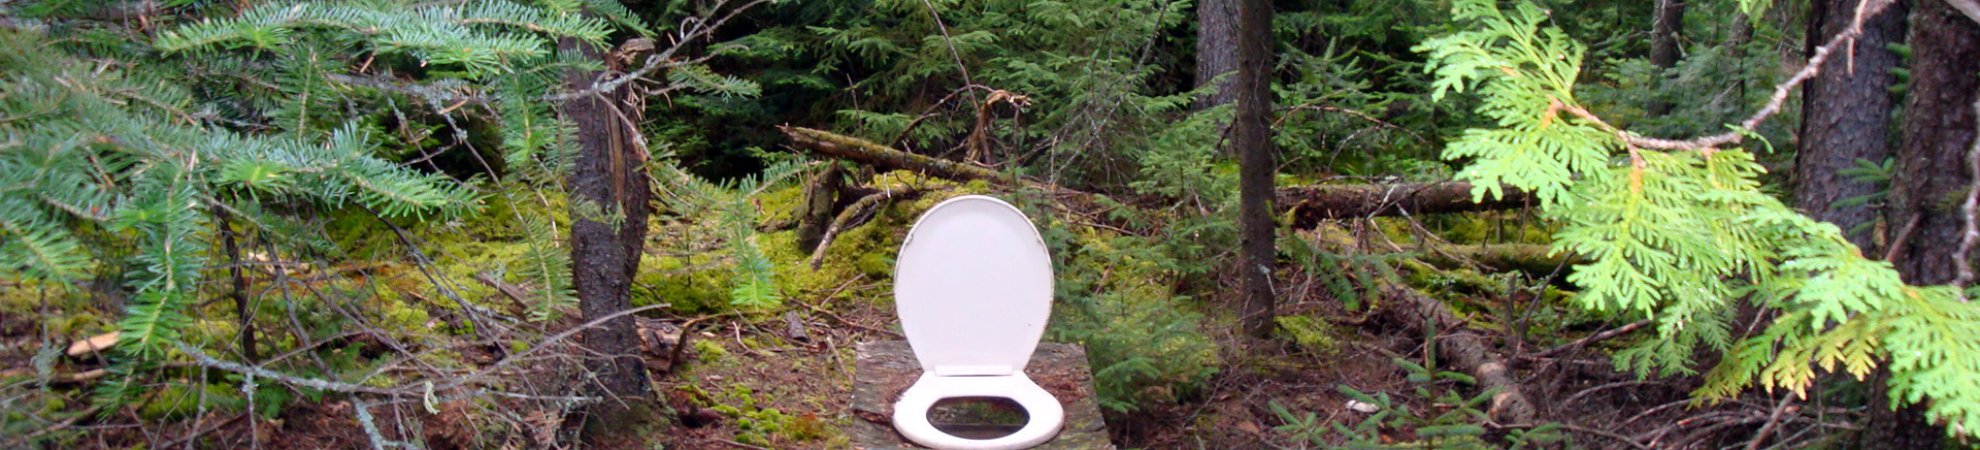 Camping outdoor toilet